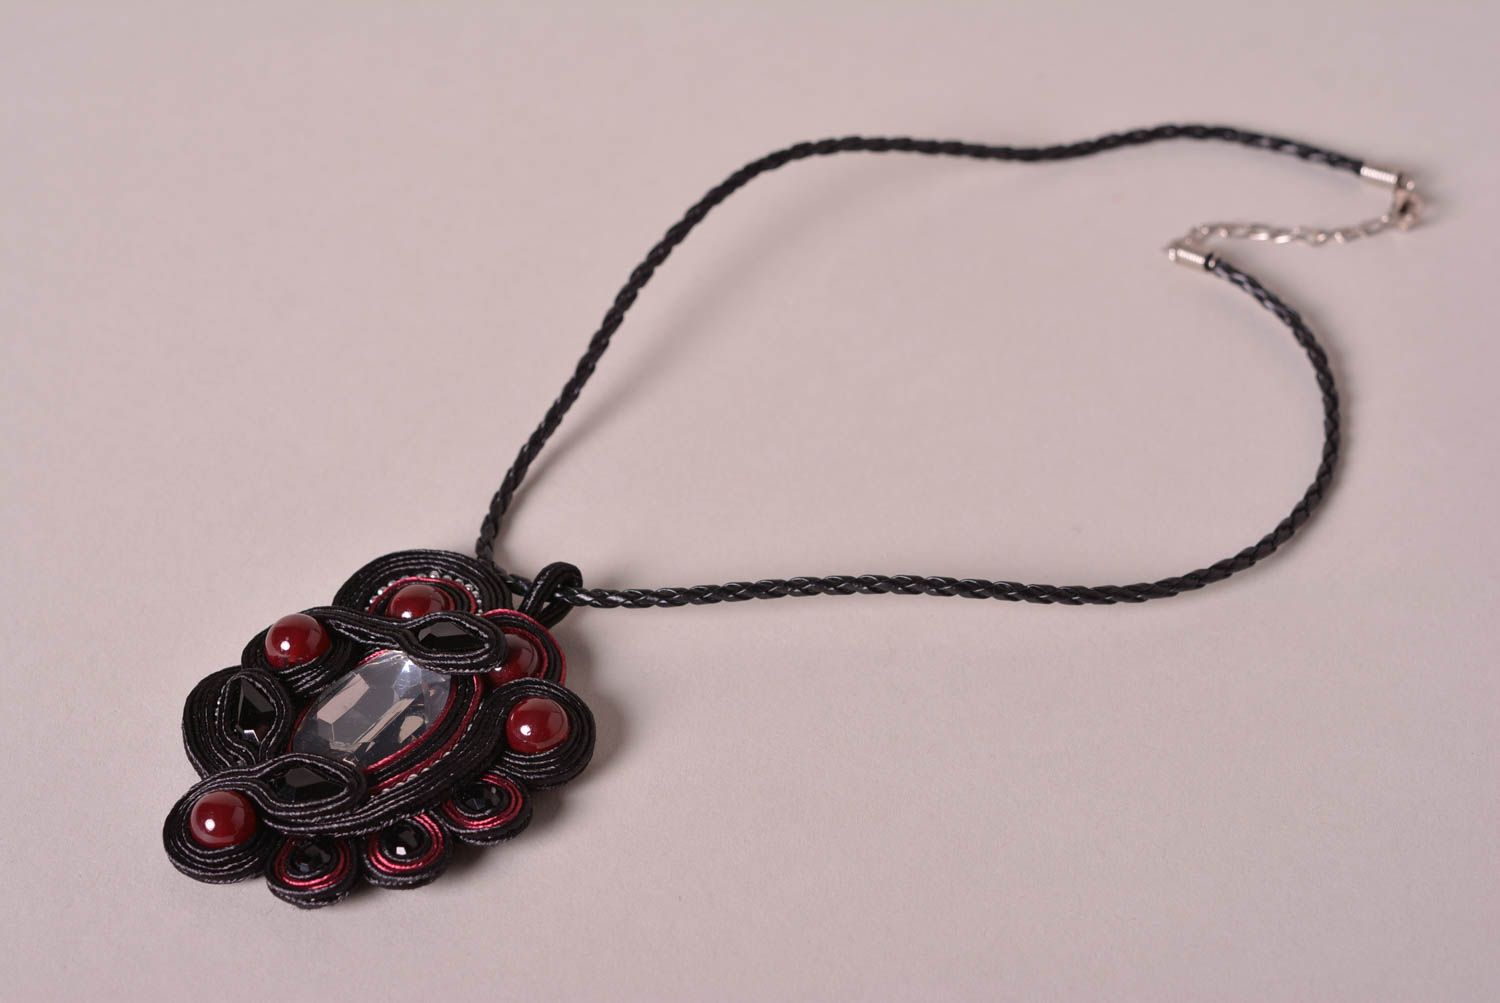 Handmade necklace soutache pendant necklace designer jewelry gifts for women photo 1